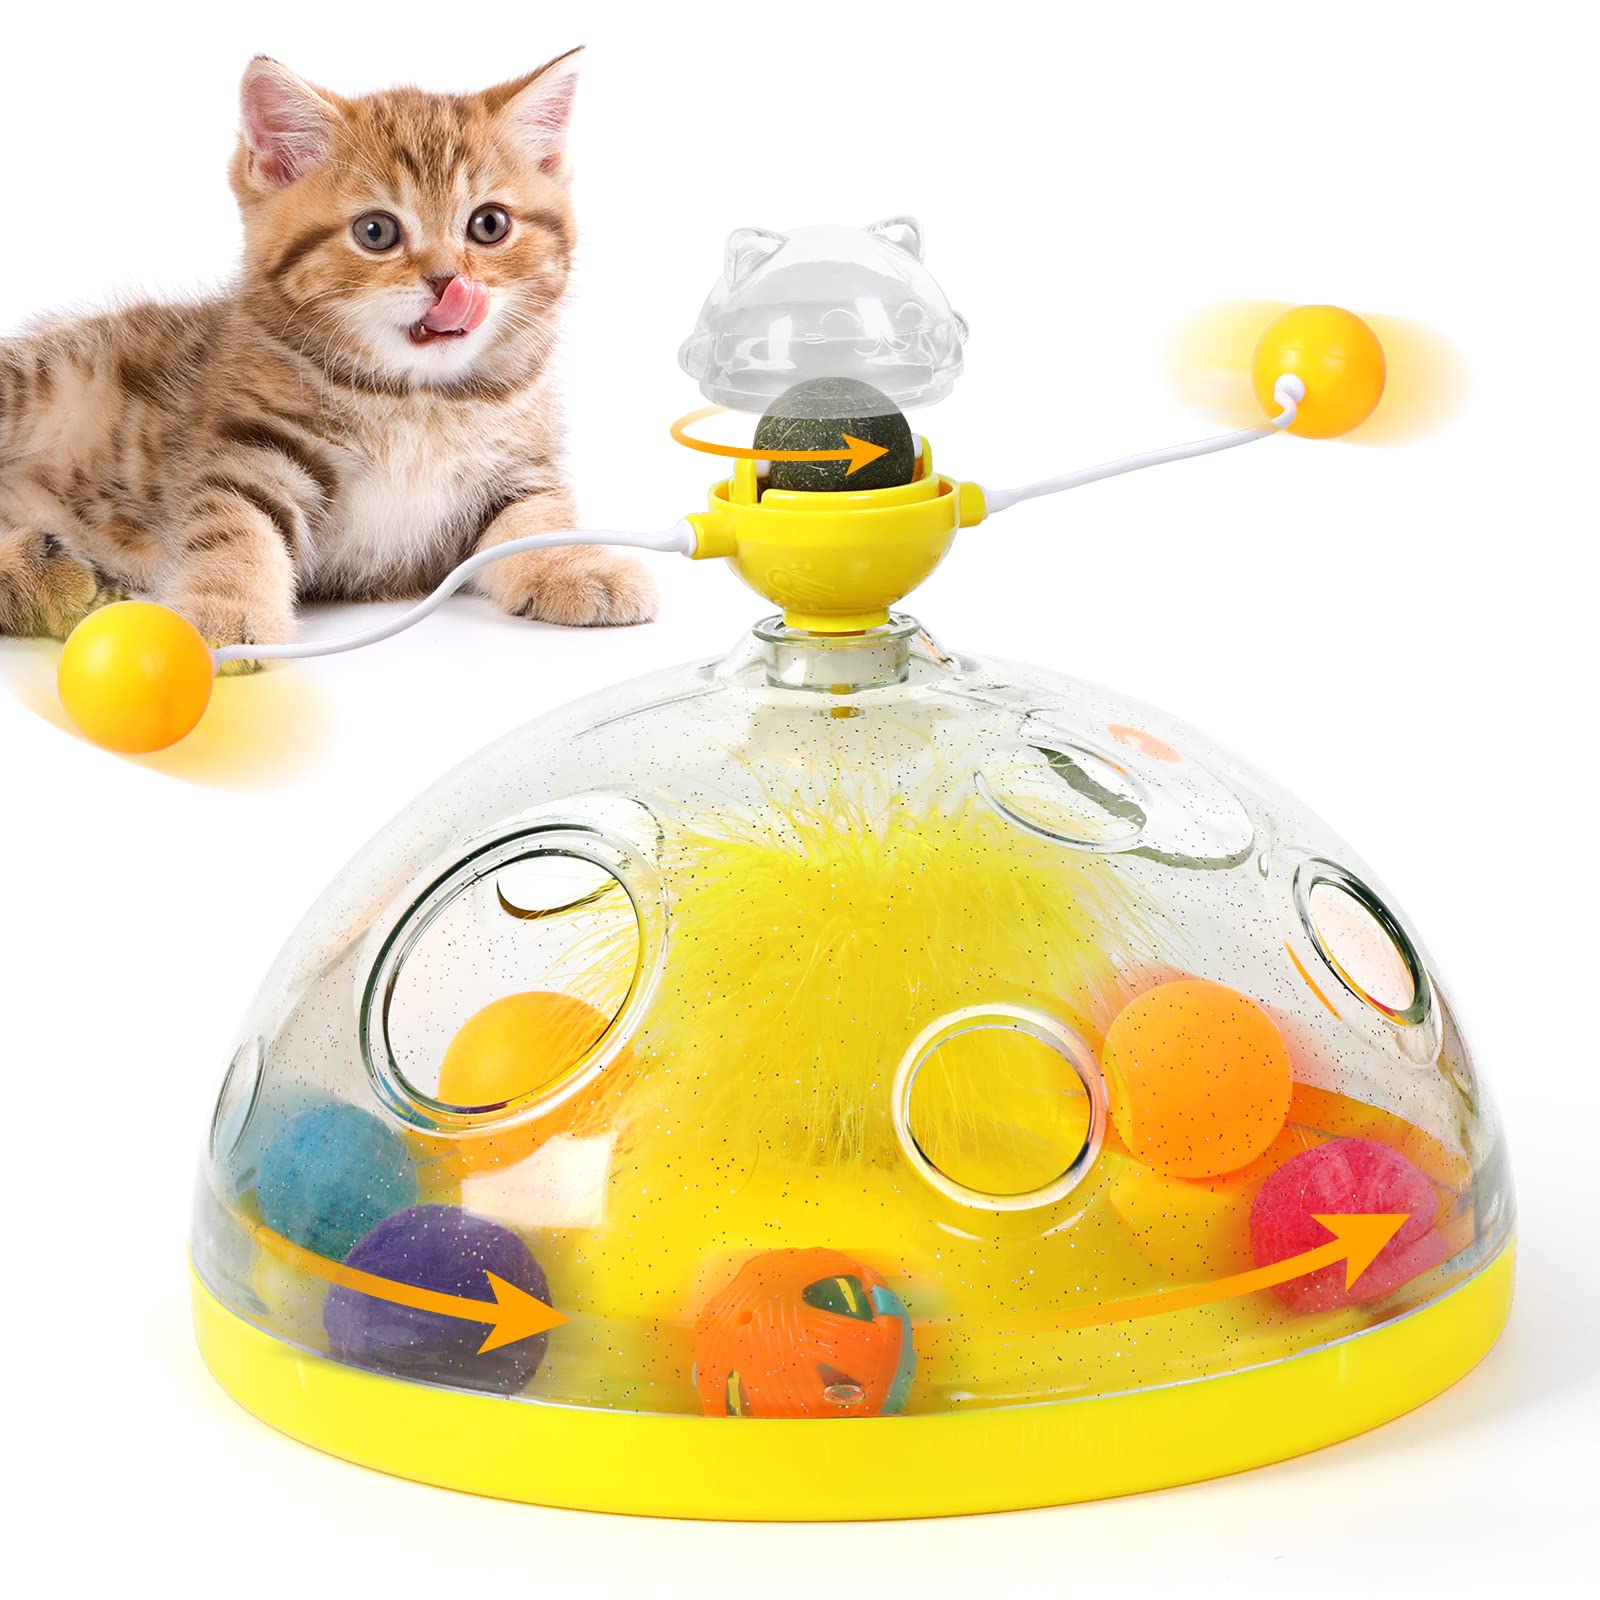 CAT AMAZING - Best Cat Toy Ever - Puzzle Toy & Feeder for Cats